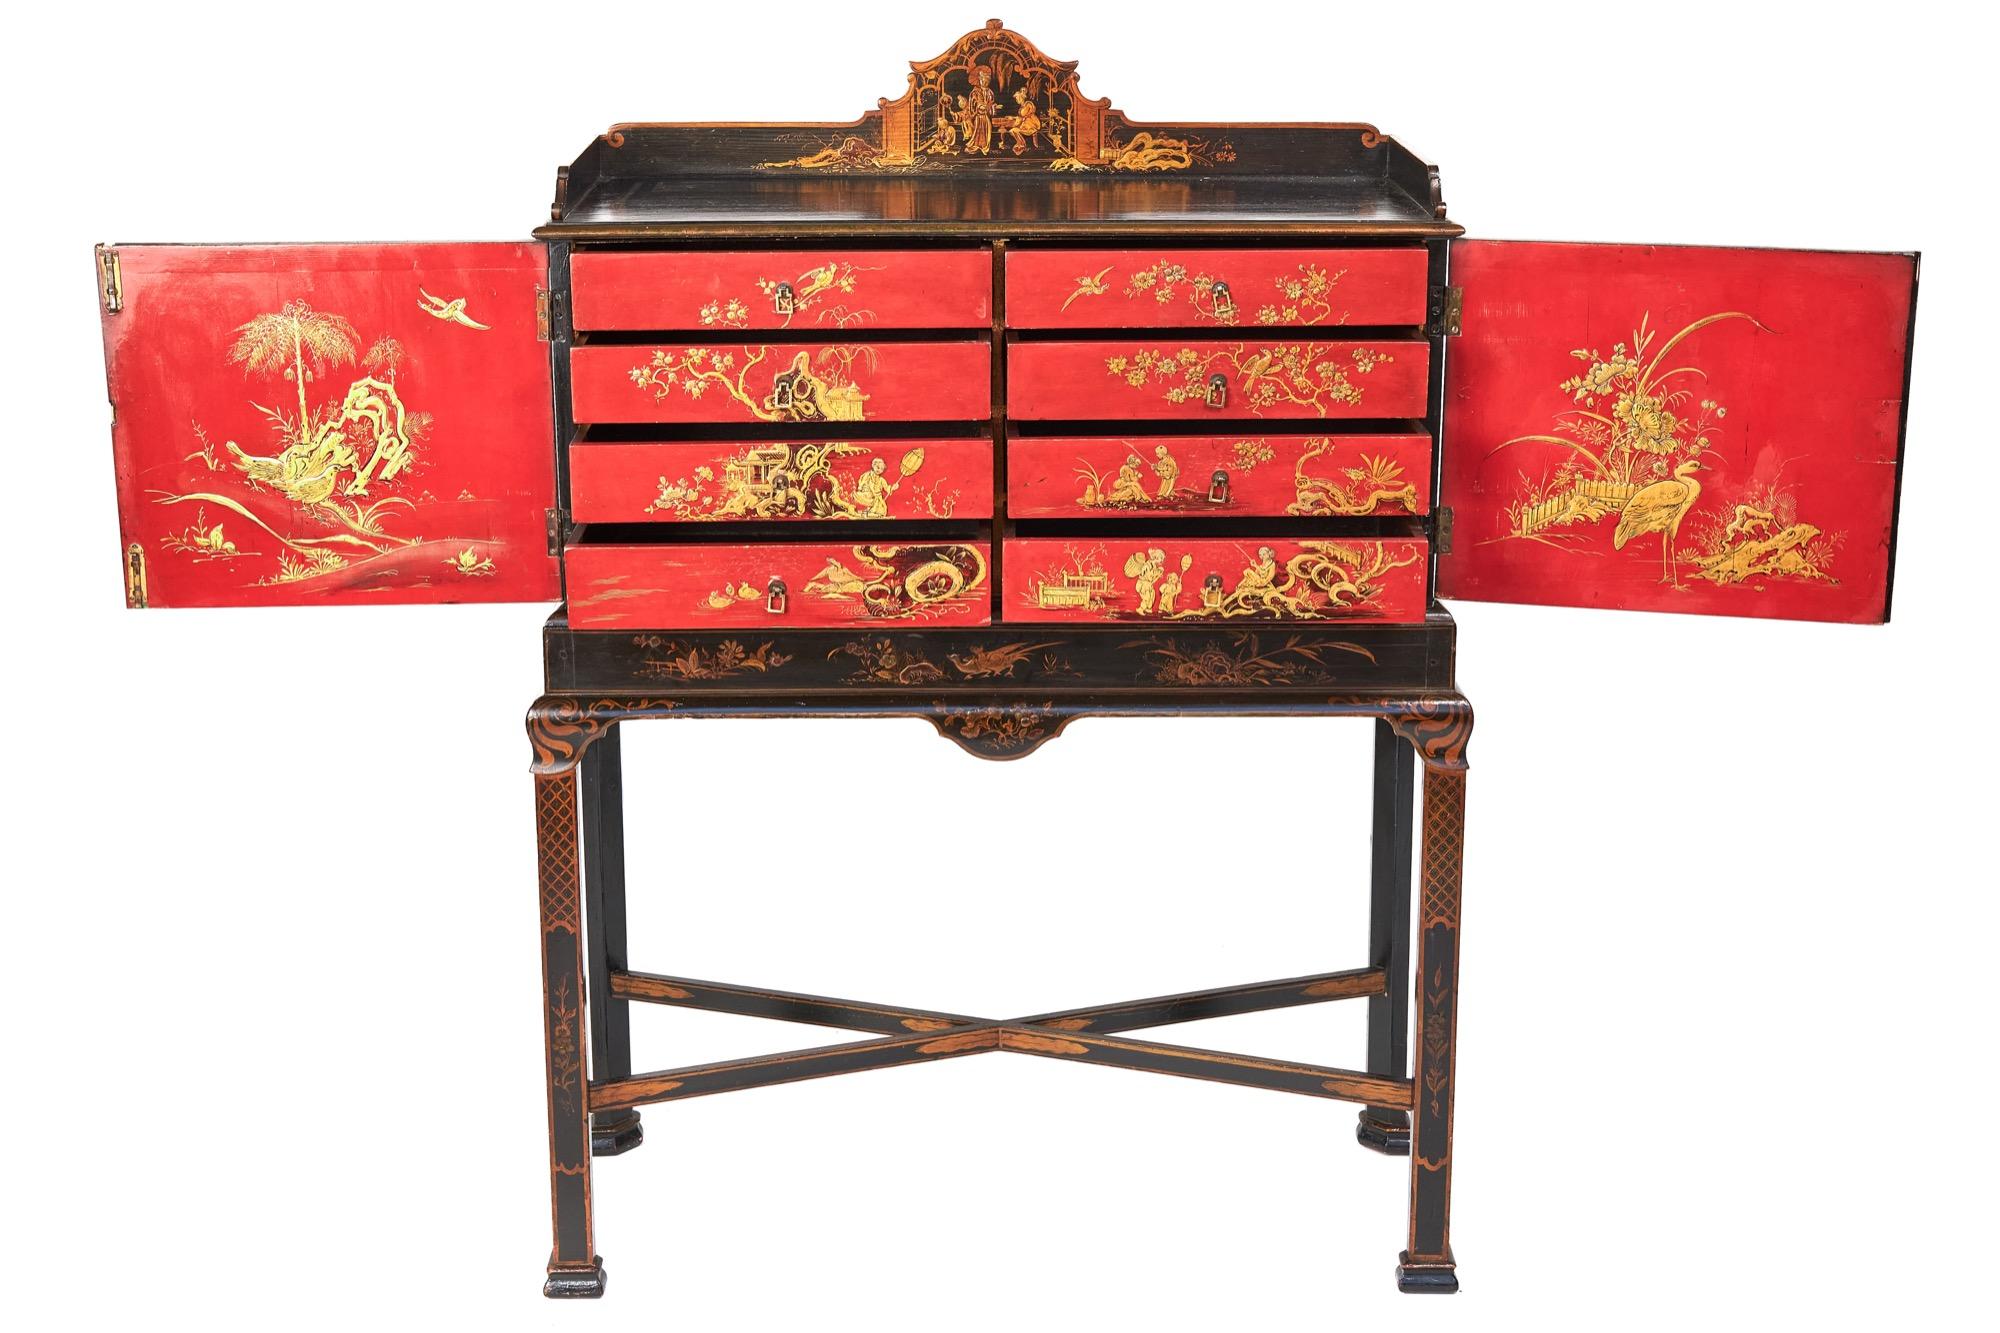 Fine Chinoiserie Decorated fitted 8 drawer Cabinet on stand circa 1900
Three Quarter tray top with shaped back depicting:
Interior scene with figures & Foliage,
Two doors, with shaped Chinoiserie decorated panels Depicting:
Figures &